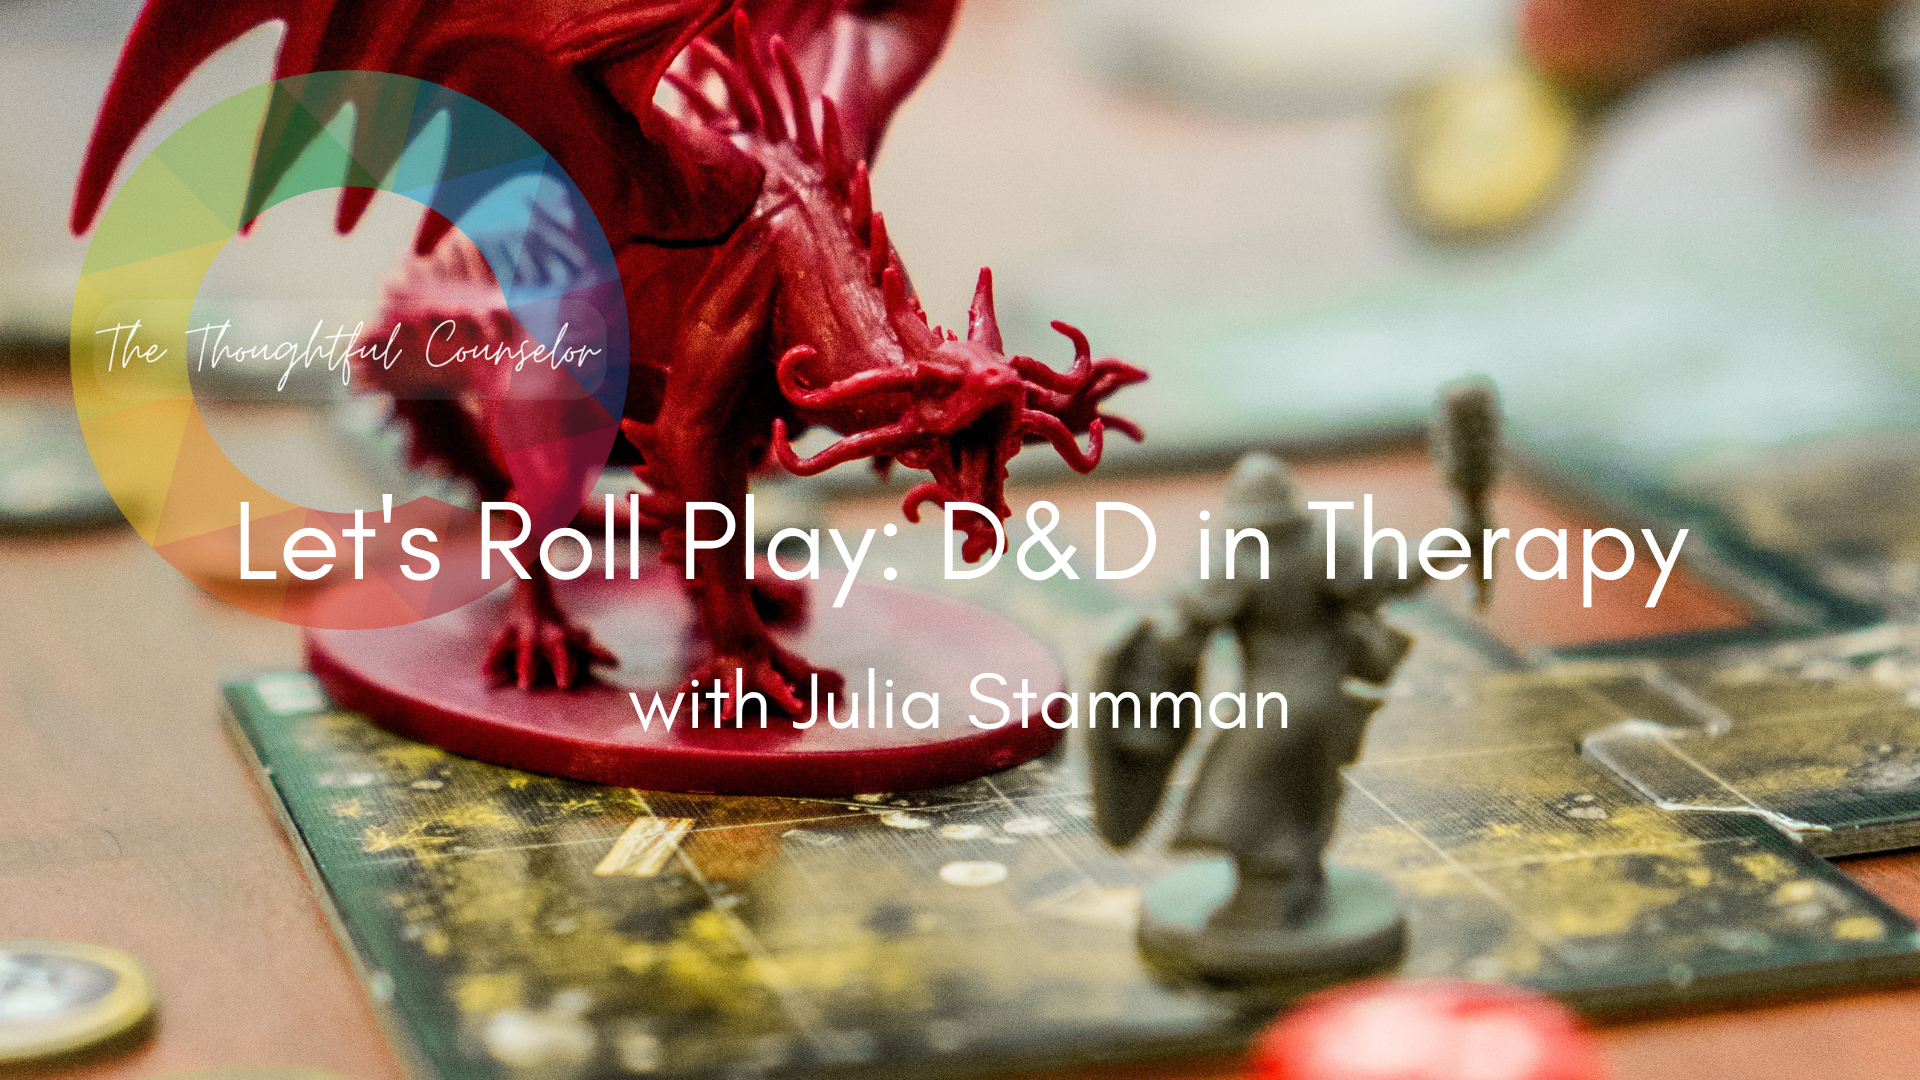 Let's Roll Play: D&D in Therapy